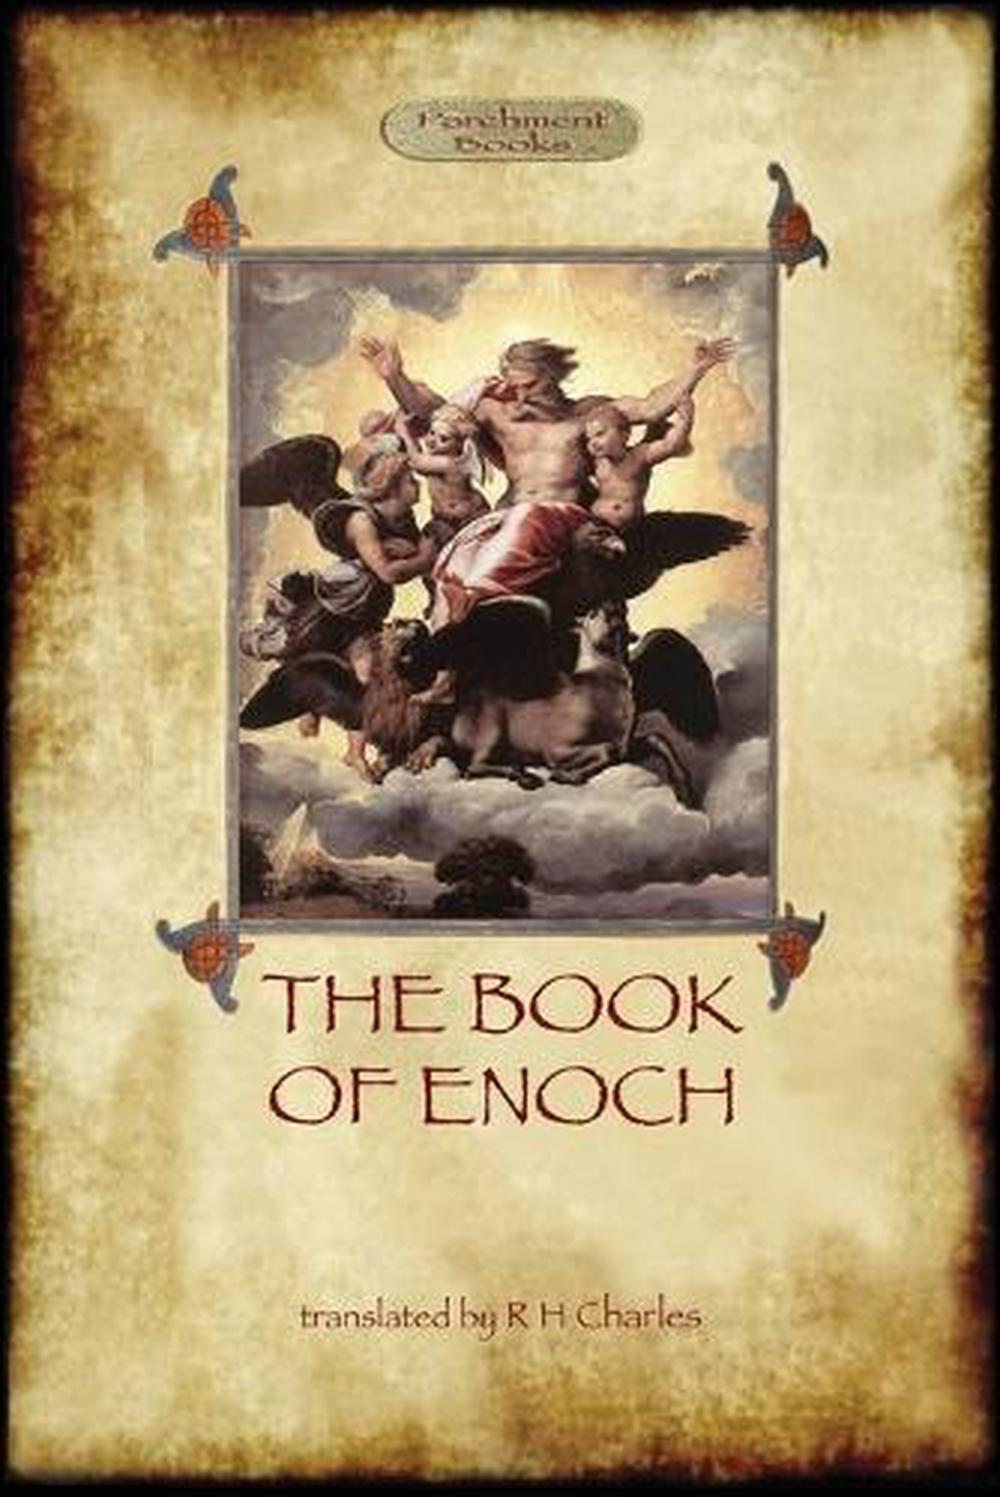 about book of enoch